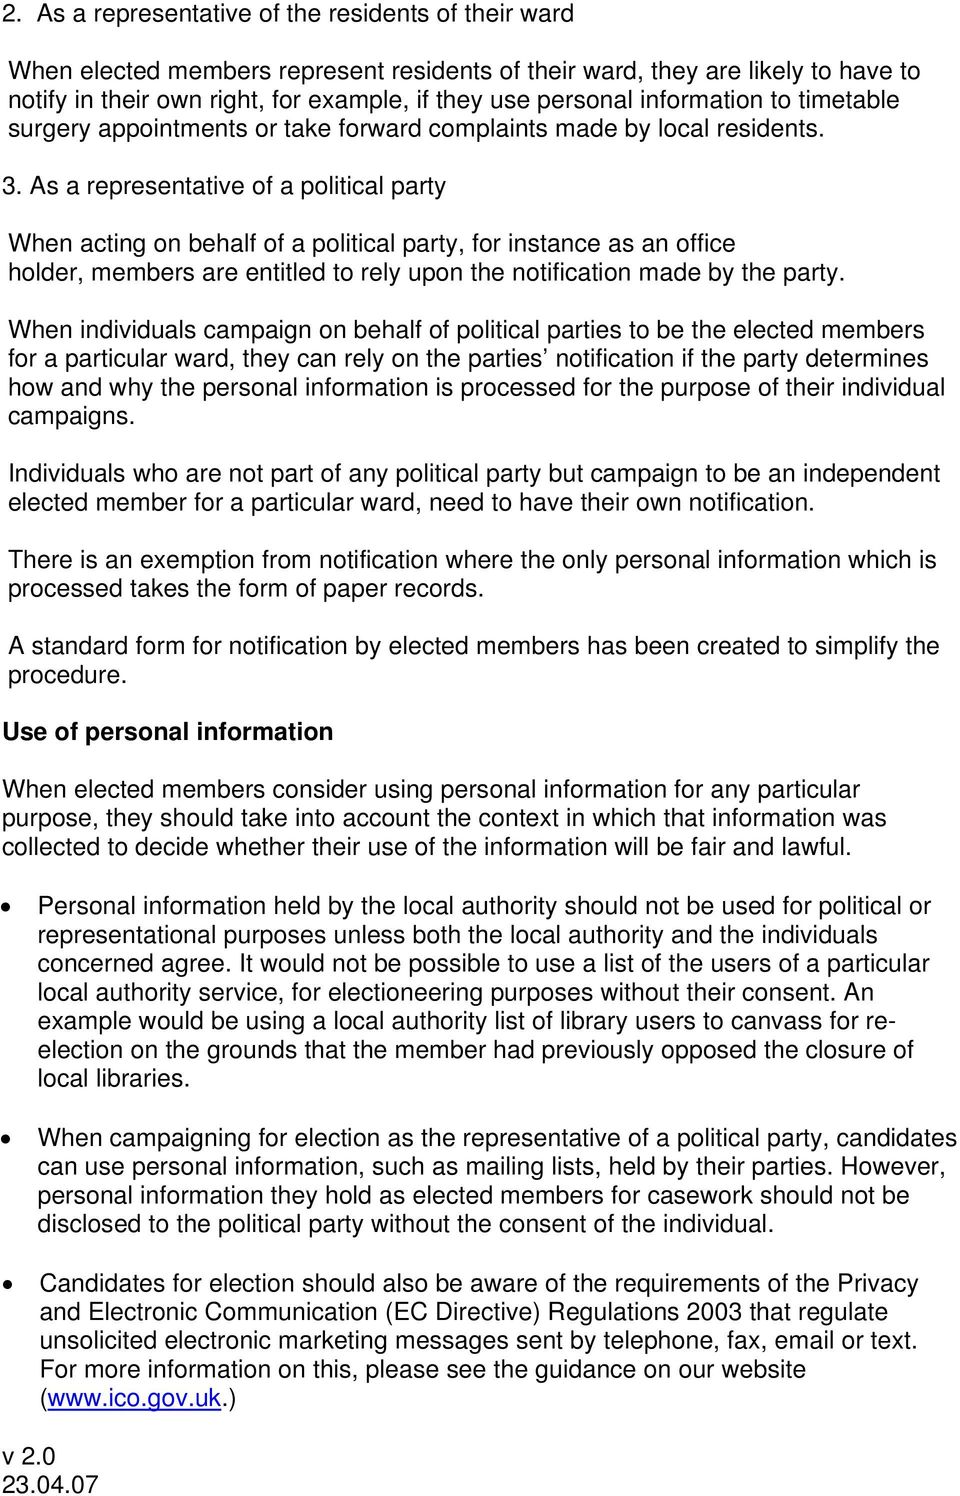 As a representative of a political party When acting on behalf of a political party, for instance as an office holder, members are entitled to rely upon the notification made by the party.